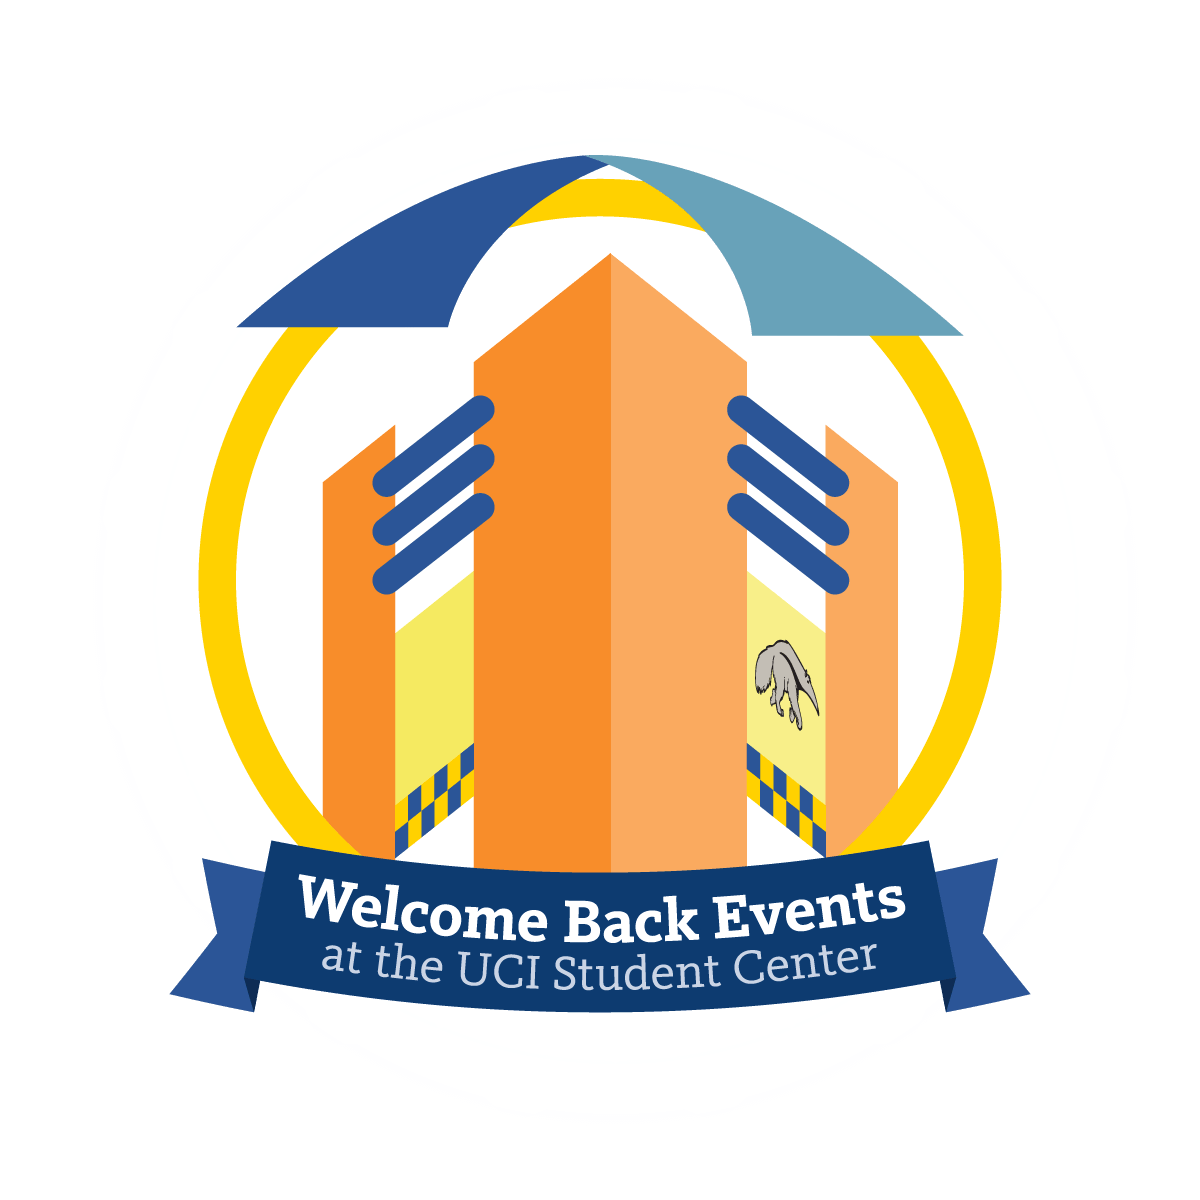 Welcome Back Events at the UCI Student Center